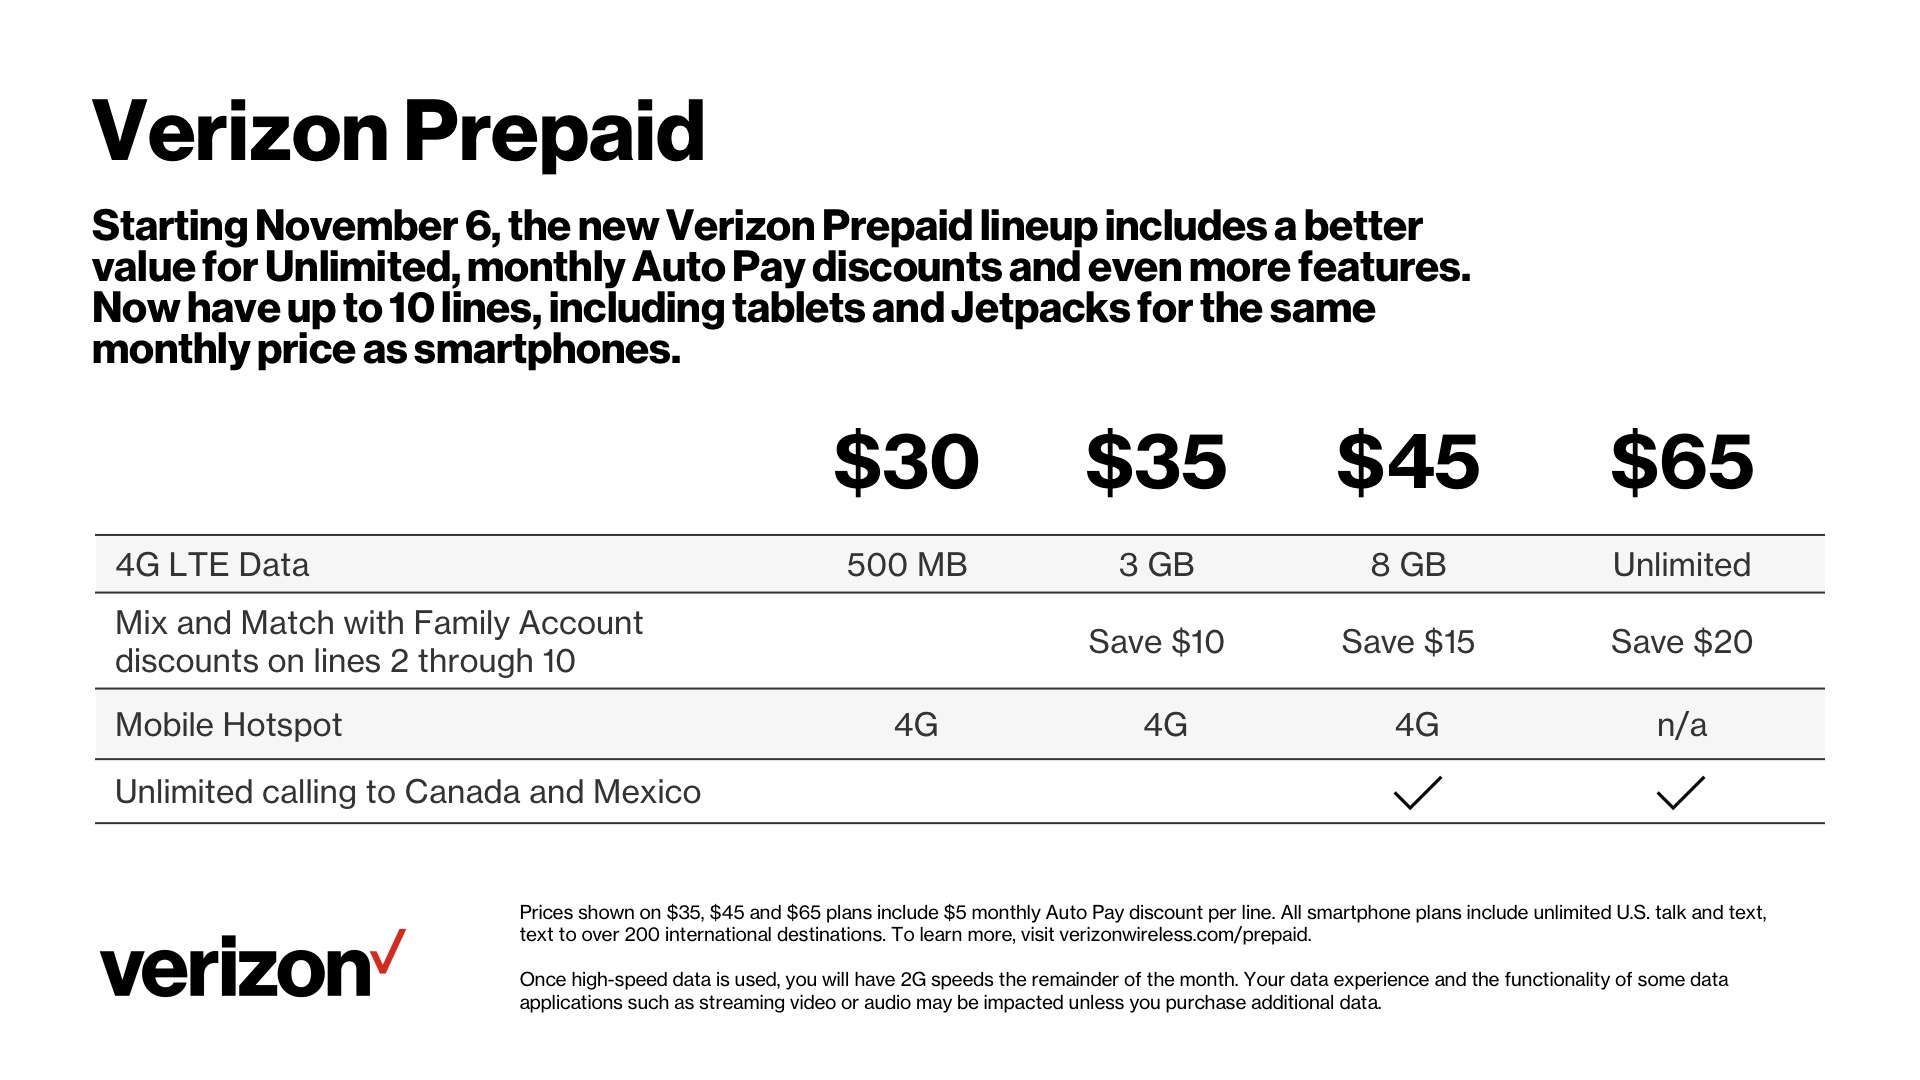 www.verizon.com plans unlimited - Can I mix and match between Unlimited Ultimate, Unlimited Plus and Unlimited Welcome?